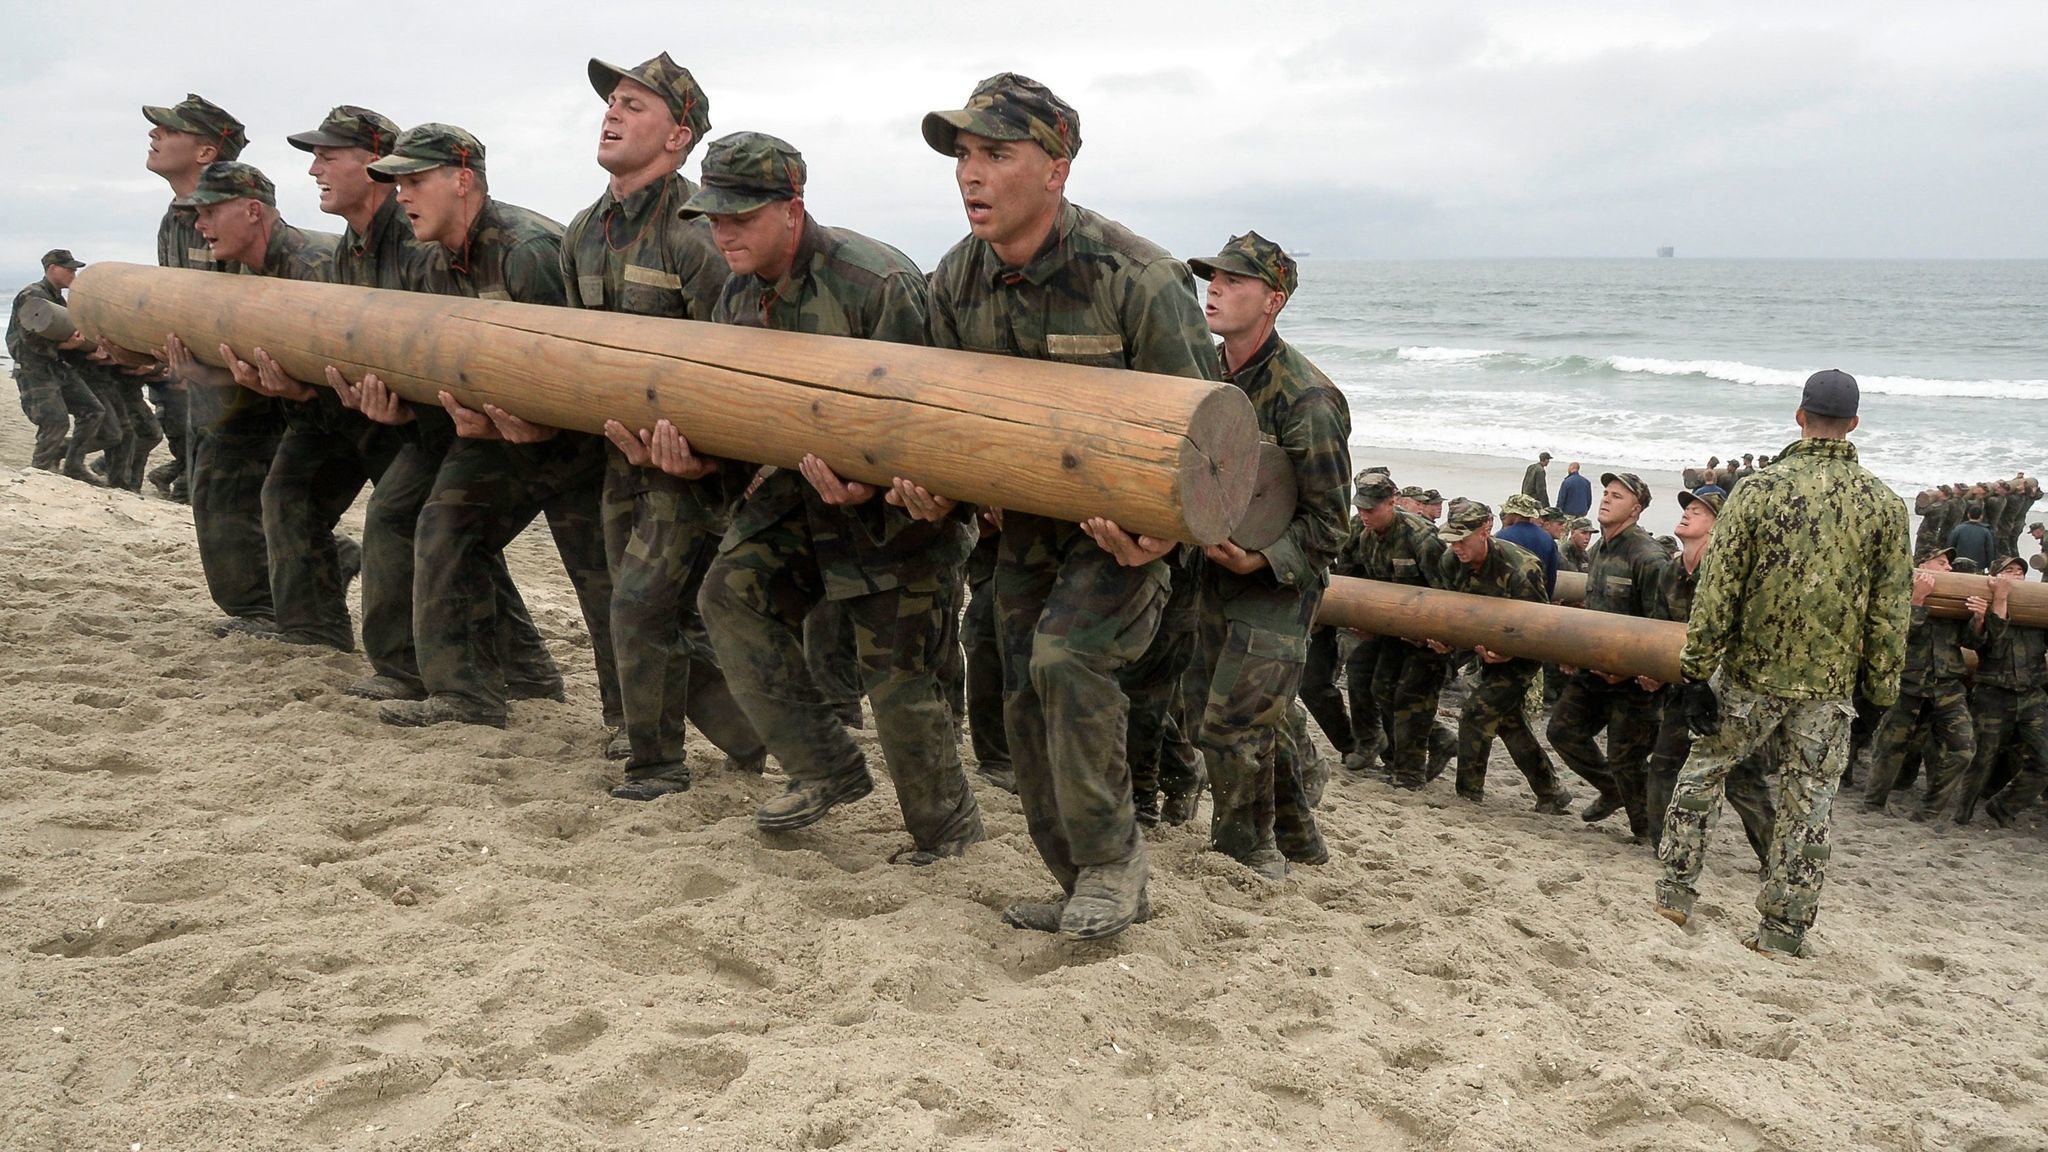 1st Woman Drops Out Of Navy Seal Training Pipeline The